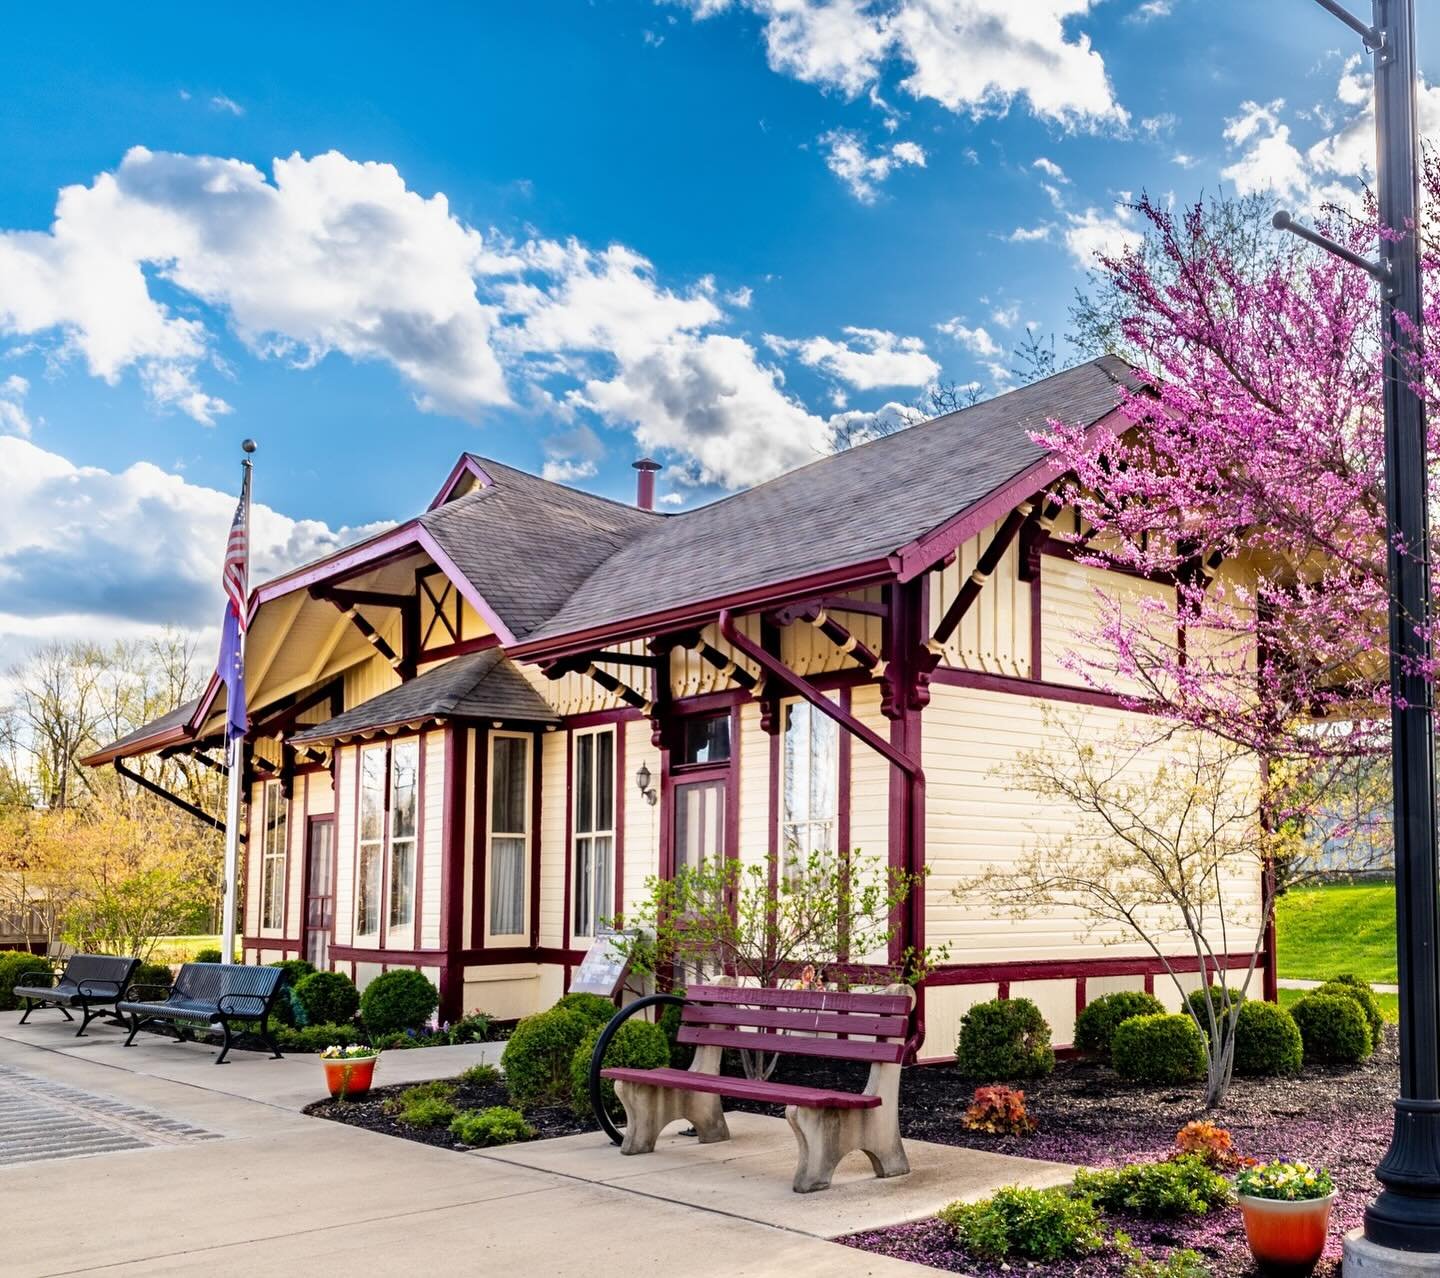 Happy #NationalTrainDay from The Parke County Visitor&rsquo;s Information Center, the former Train Depot! ✨

This depot was built in 1883 as a station for the Vandalia railroad. It had two ticket windows and separate waiting rooms for men and women. 